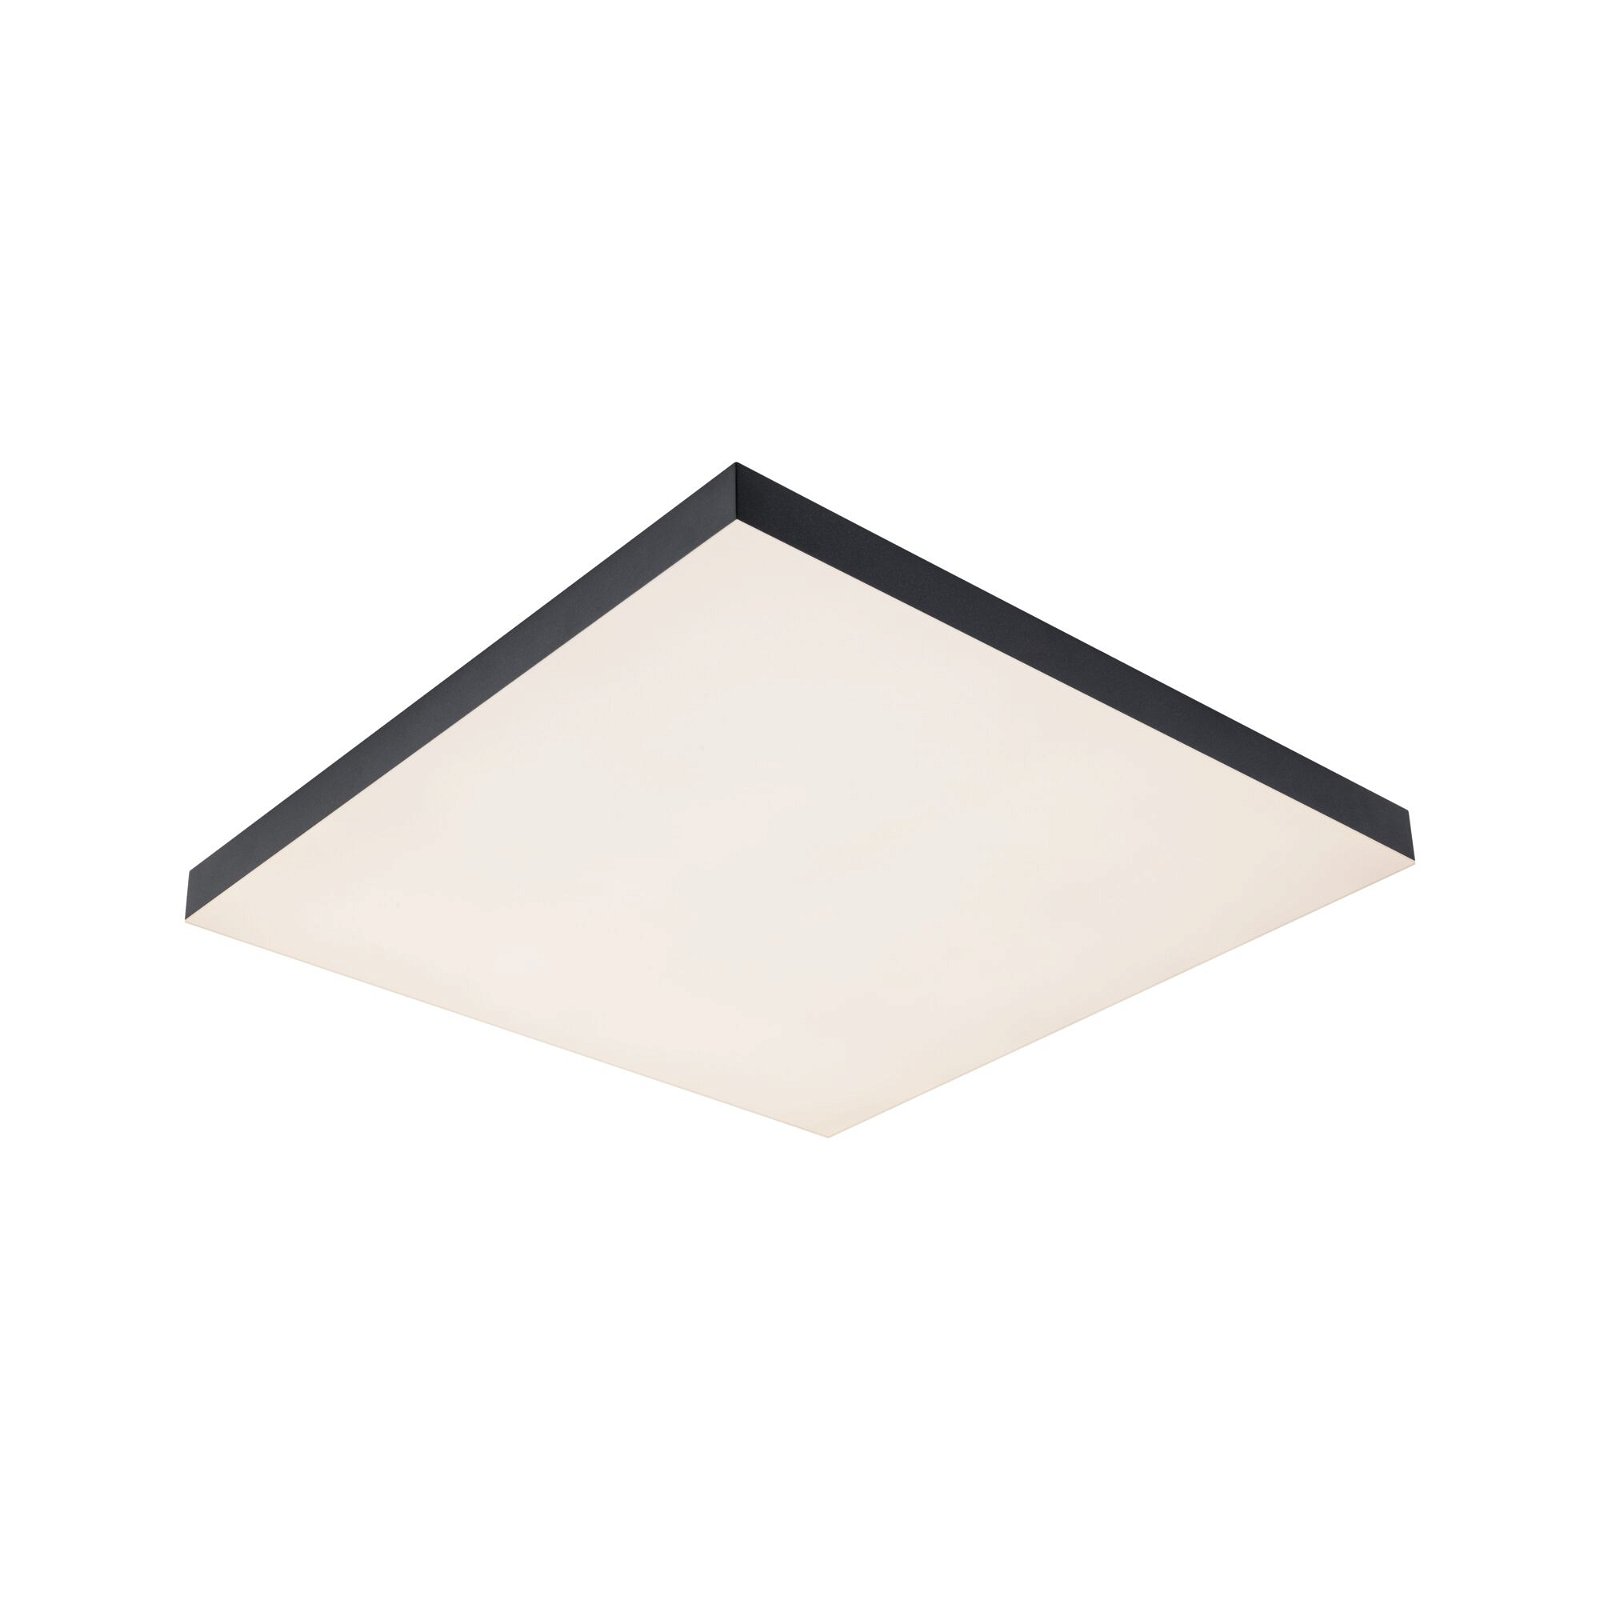 LED Panel Velora Rainbow square 450x450mm RGBW Black dimmable